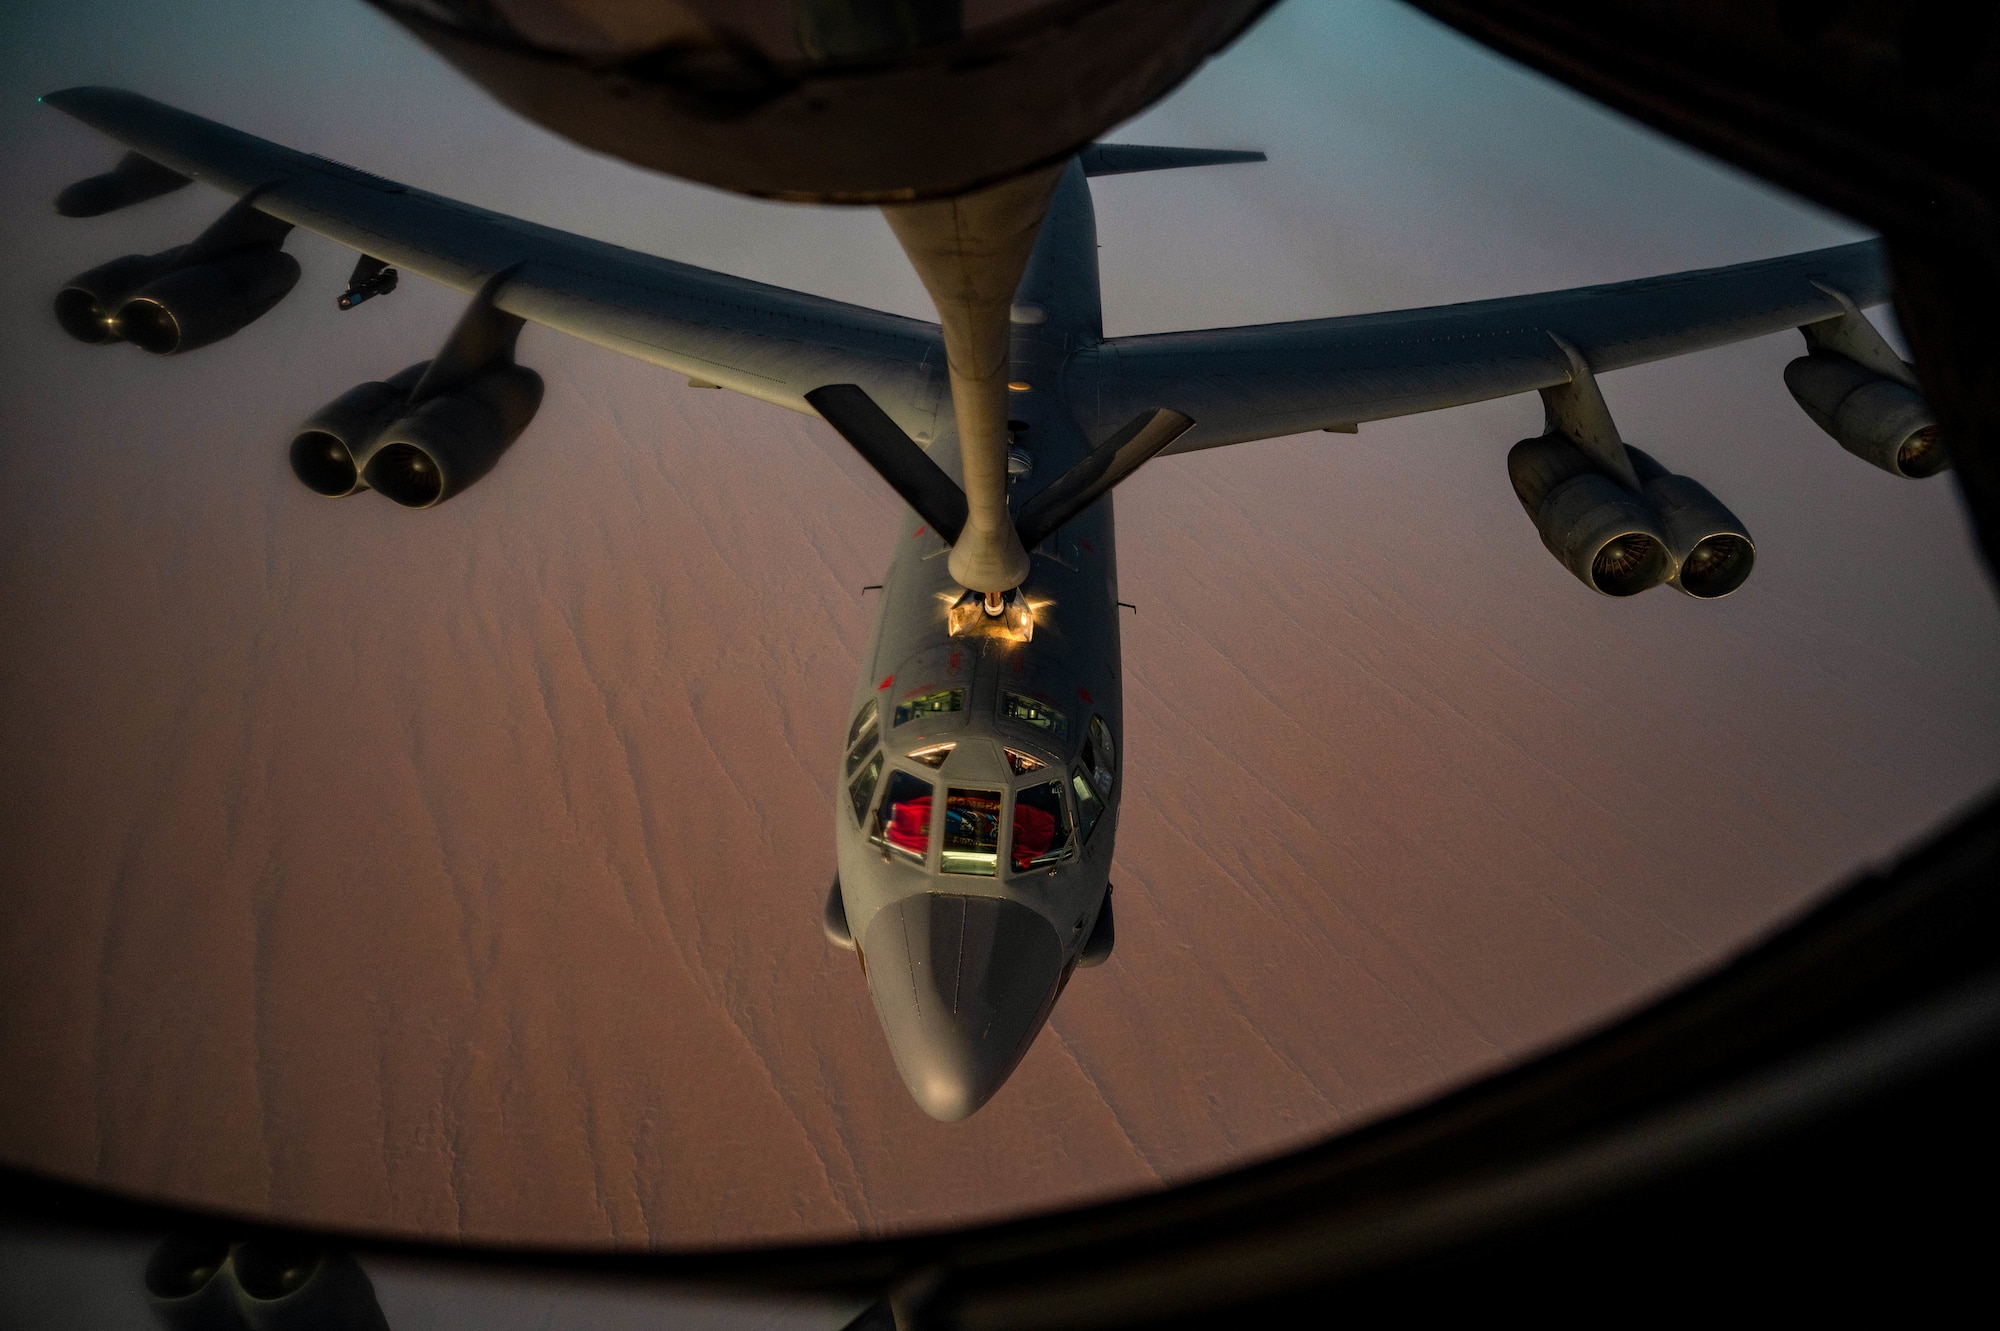 A U.S. Air Force B-52H Stratofortress, assigned to the 5th Bomb Wing, Minot Air Force Base, North Dakota, is refueled by a KC-135 Stratotanker assigned to the 340th Expeditionary Air Refueling Squadron, Al Udeid Air Base, Qatar, during a Bomber Task Force mission, over the U.S. Central Command area of responsibility, Sept. 4, 2022. BTF Missions demonstrate the U.S.’s commitment to regional security and stability by showing how the U.S. will decisively respond to threats against the U.S., coalition and partner forces. (U.S. Air Force photo by Staff Sgt. Dana Tourtellotte)